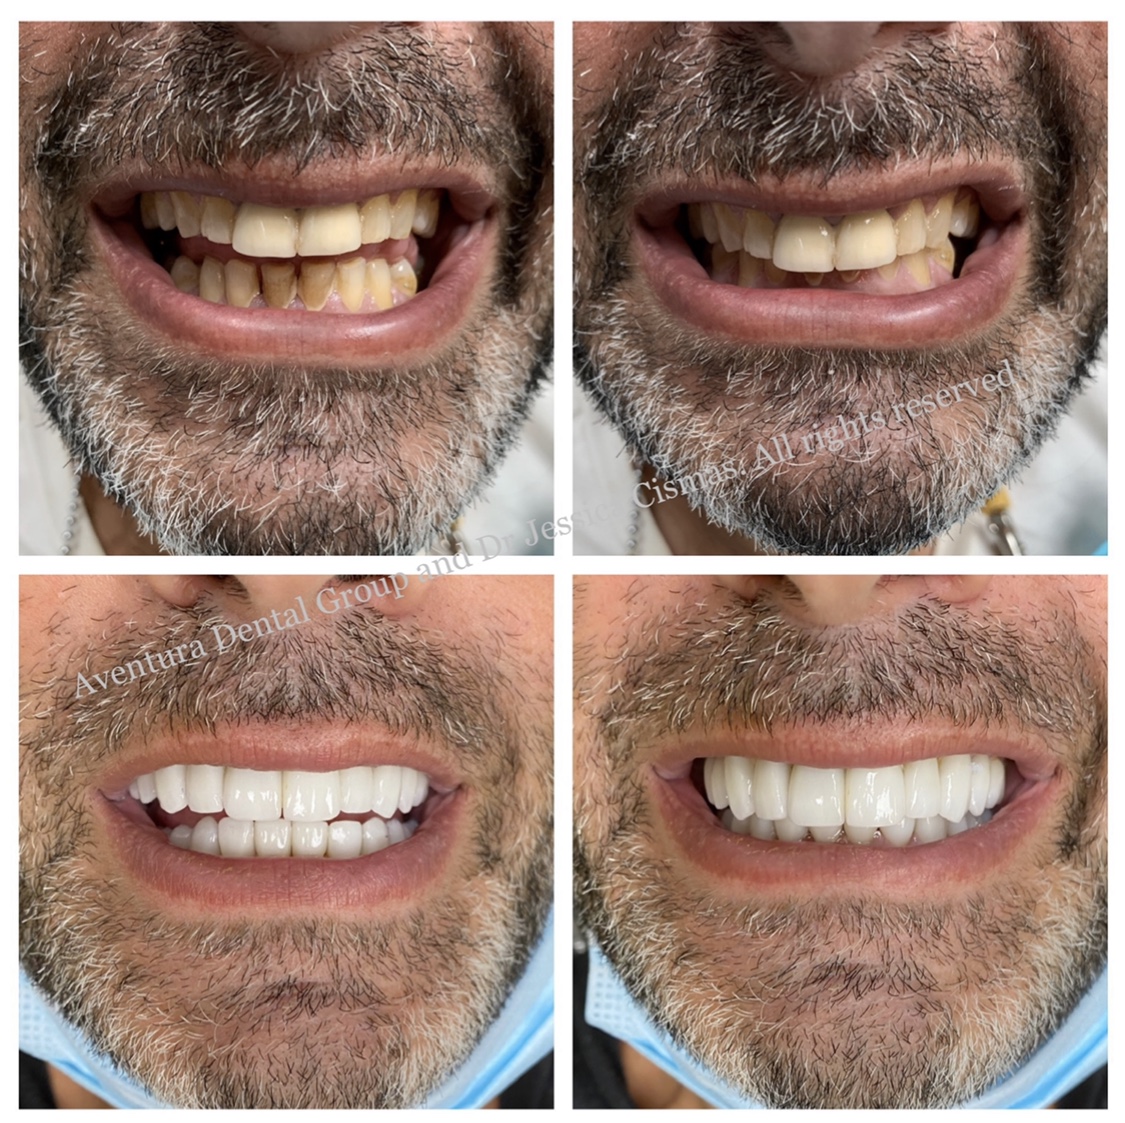 For the month of September, Aventura Dental Group and Dr. Jessica Cismas presents the latest aesthetic full mouth restoration done beautifully by our master ceramists. Dr. Jessica Cismas utilized the latest cutting edge technology and materials to obtain a gorgeous long lasting natural looking smile. The patient was blown away by the final result. He is part of the bigger Aventura Dental Group family, where almost all of our patients stay patients for life at our practice. Your smile can be changed too, by DM-ing us @aventuradentalgroup or by calling us at 305-935-4030. We are your local cosmetic dentist located in Aventura since 1985. Come check us out and experience the difference in quality for yourself.